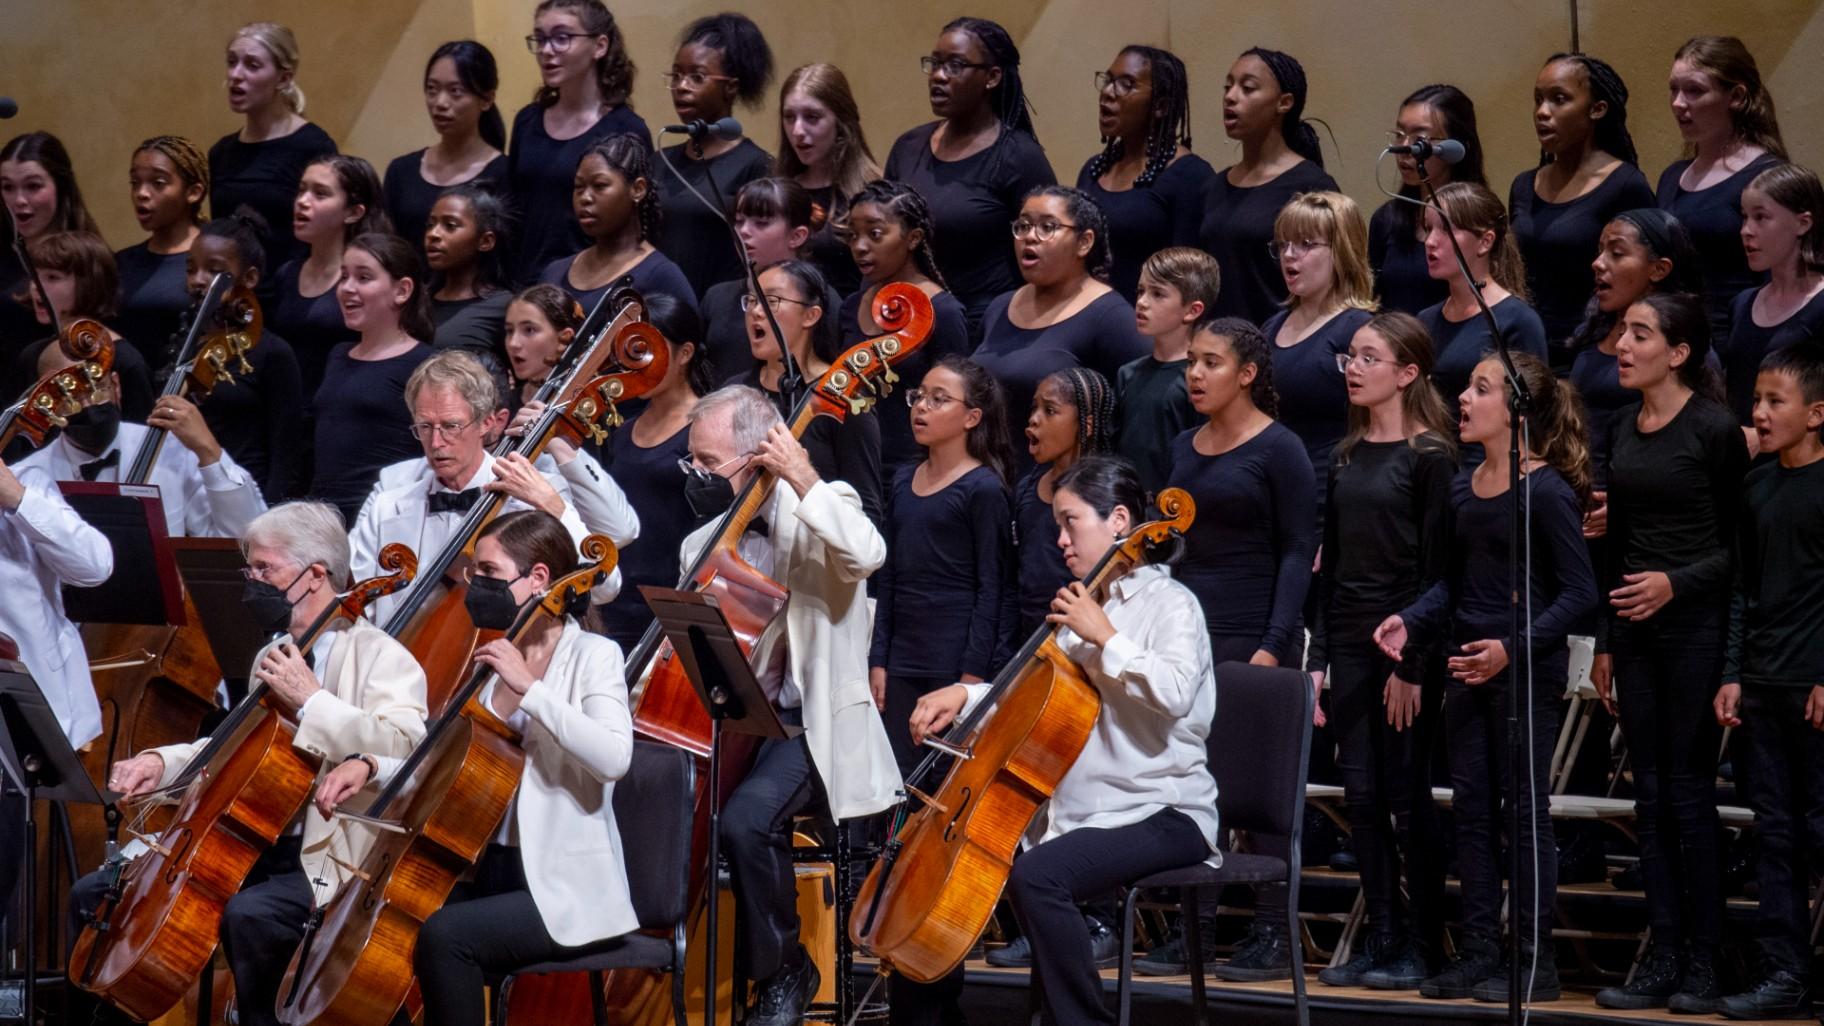 The musicians of the CSO were joined by members of the Chicago Children’s Choir in a performance of Leonard Bernstein’s “Symphony No. 3 (Kaddish) on July 30, 2022. (Courtesy of Ravinia)